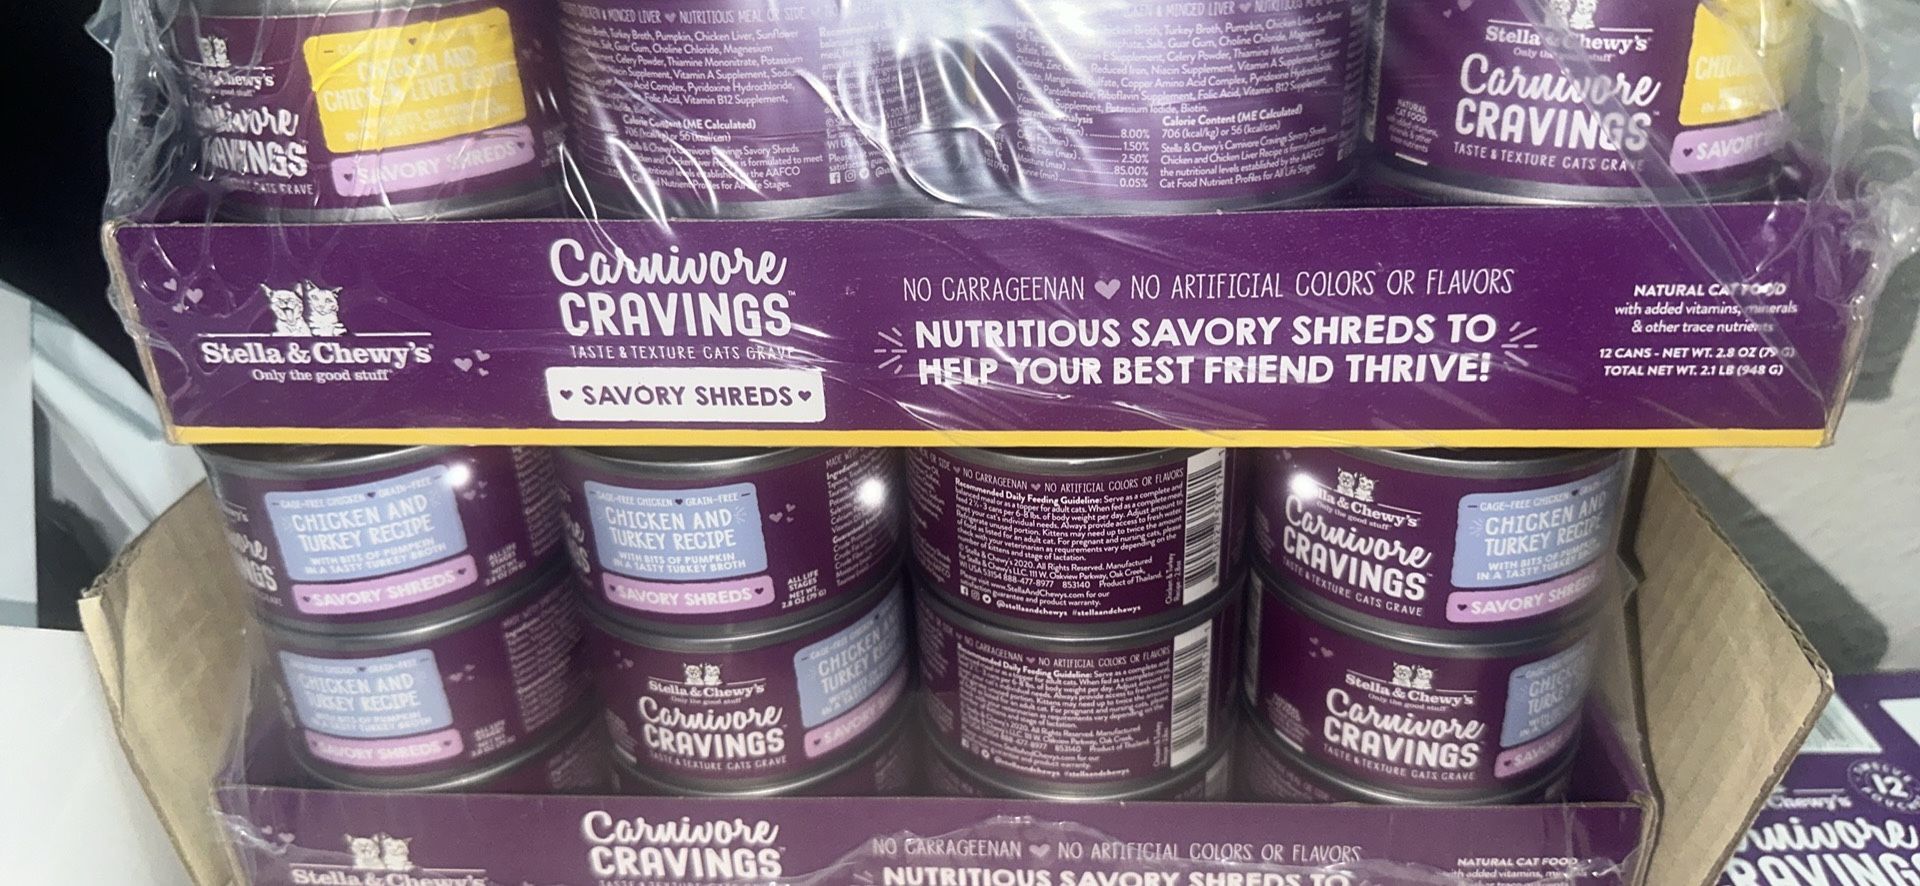 CAT FOOD Brand: Stella And Chewyss